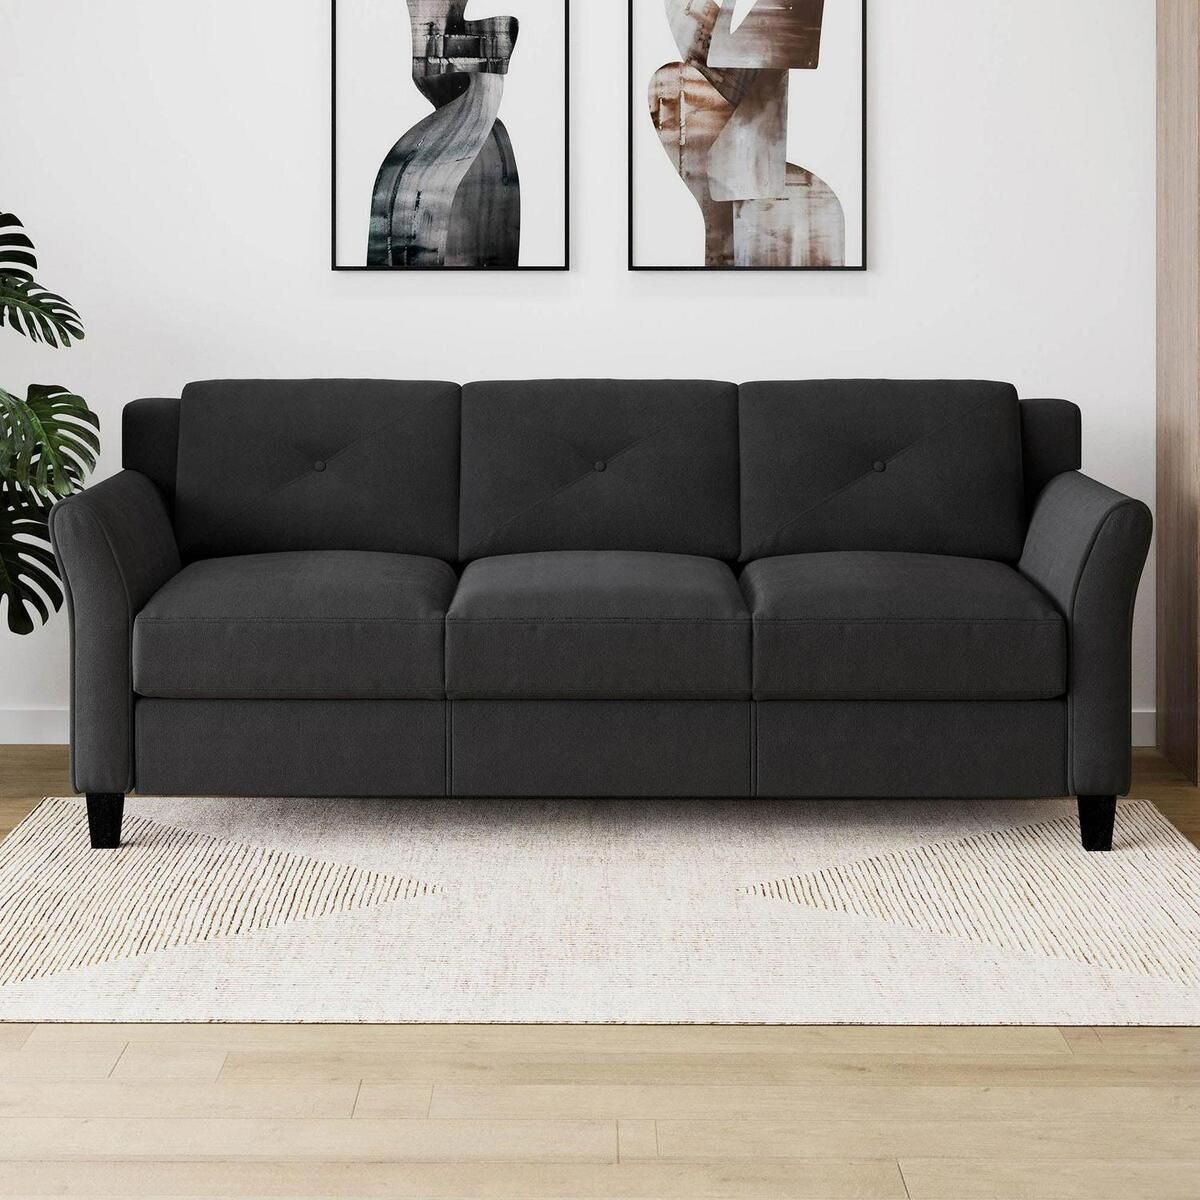 Traditional Sofa Curved Rolled Arms Comfortable Taryn Black Fabric | Ebay Throughout Traditional Black Fabric Sofas (Photo 1 of 15)